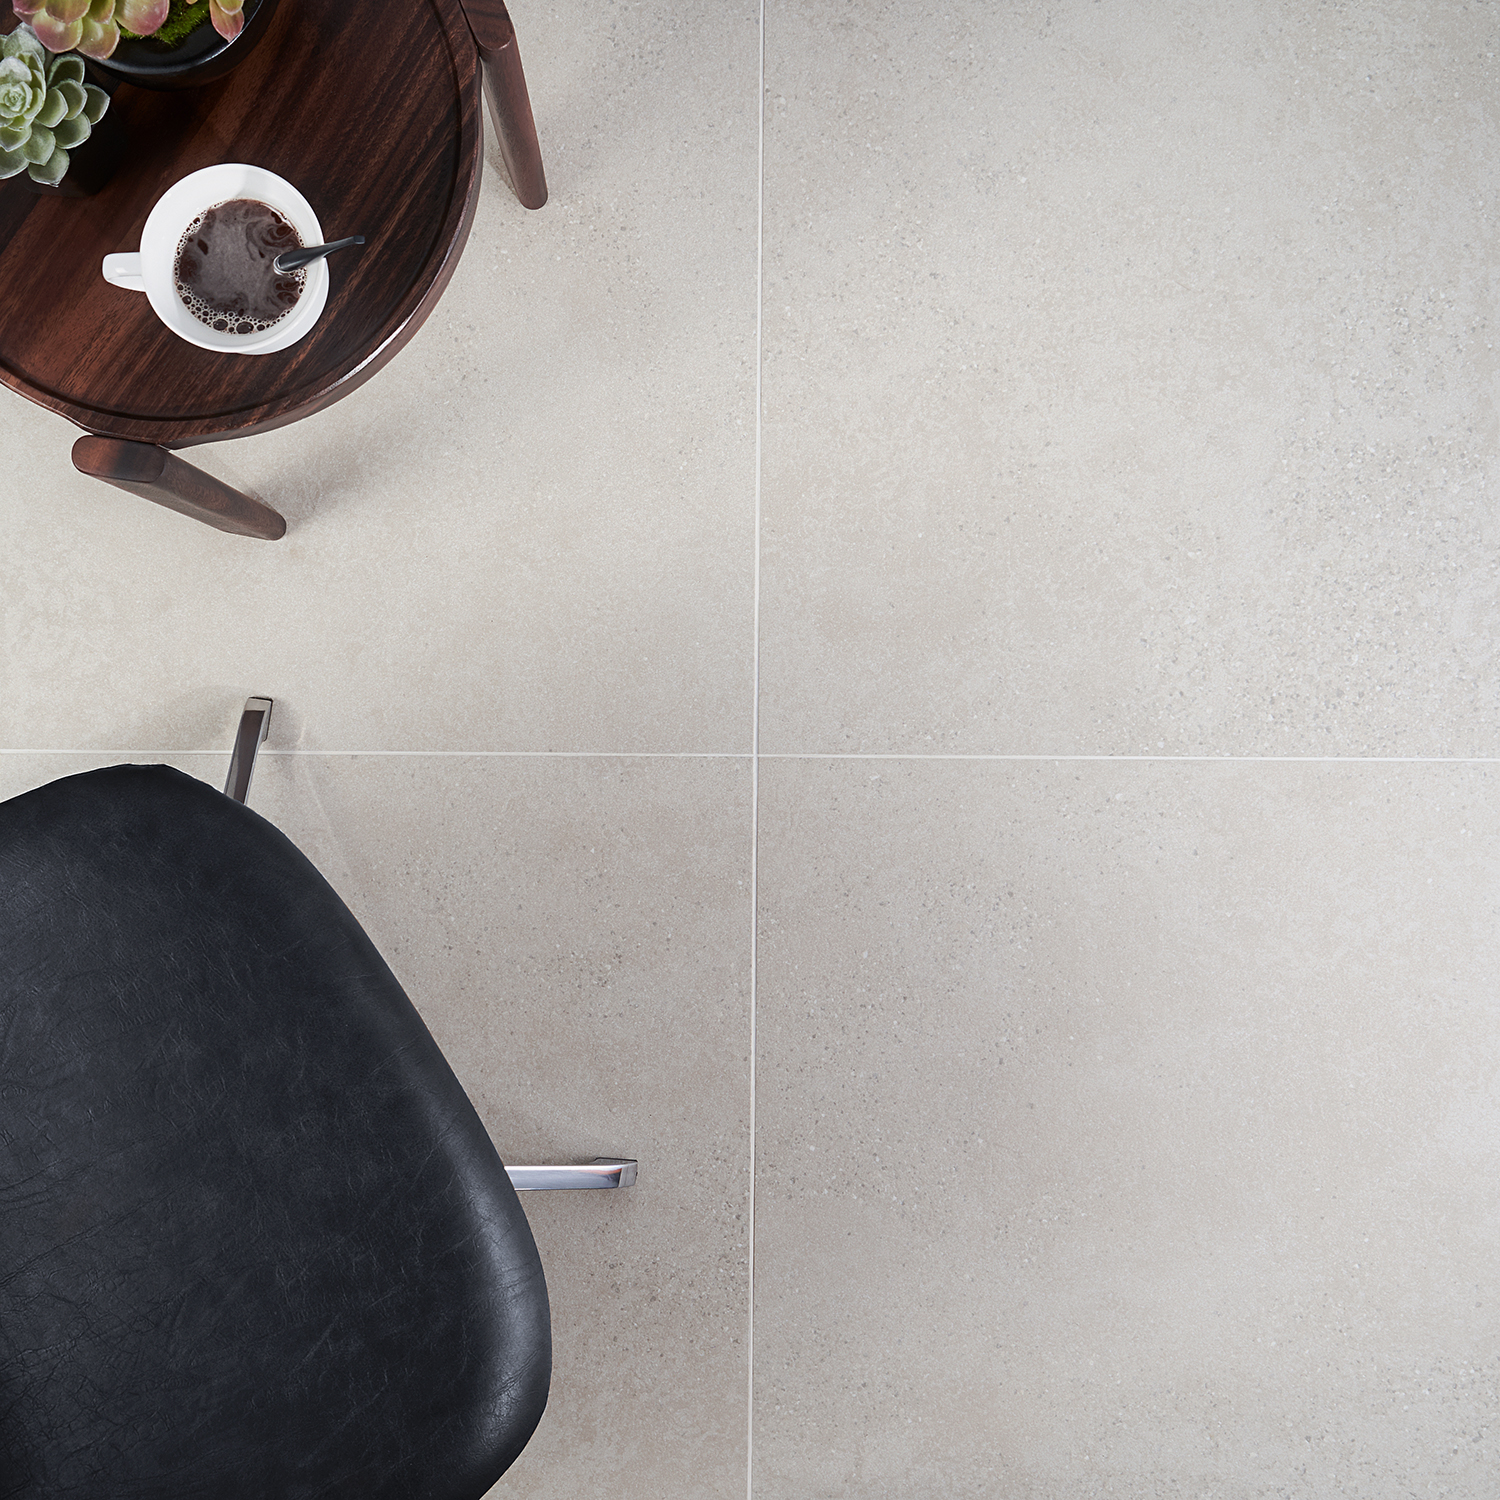 TheTruTech Collection consists of large format, through-body porcelain tiles which are the STRONGEST in the world . With an earthy, natural feel, it comes in 5 color options and 3 distinct finishes